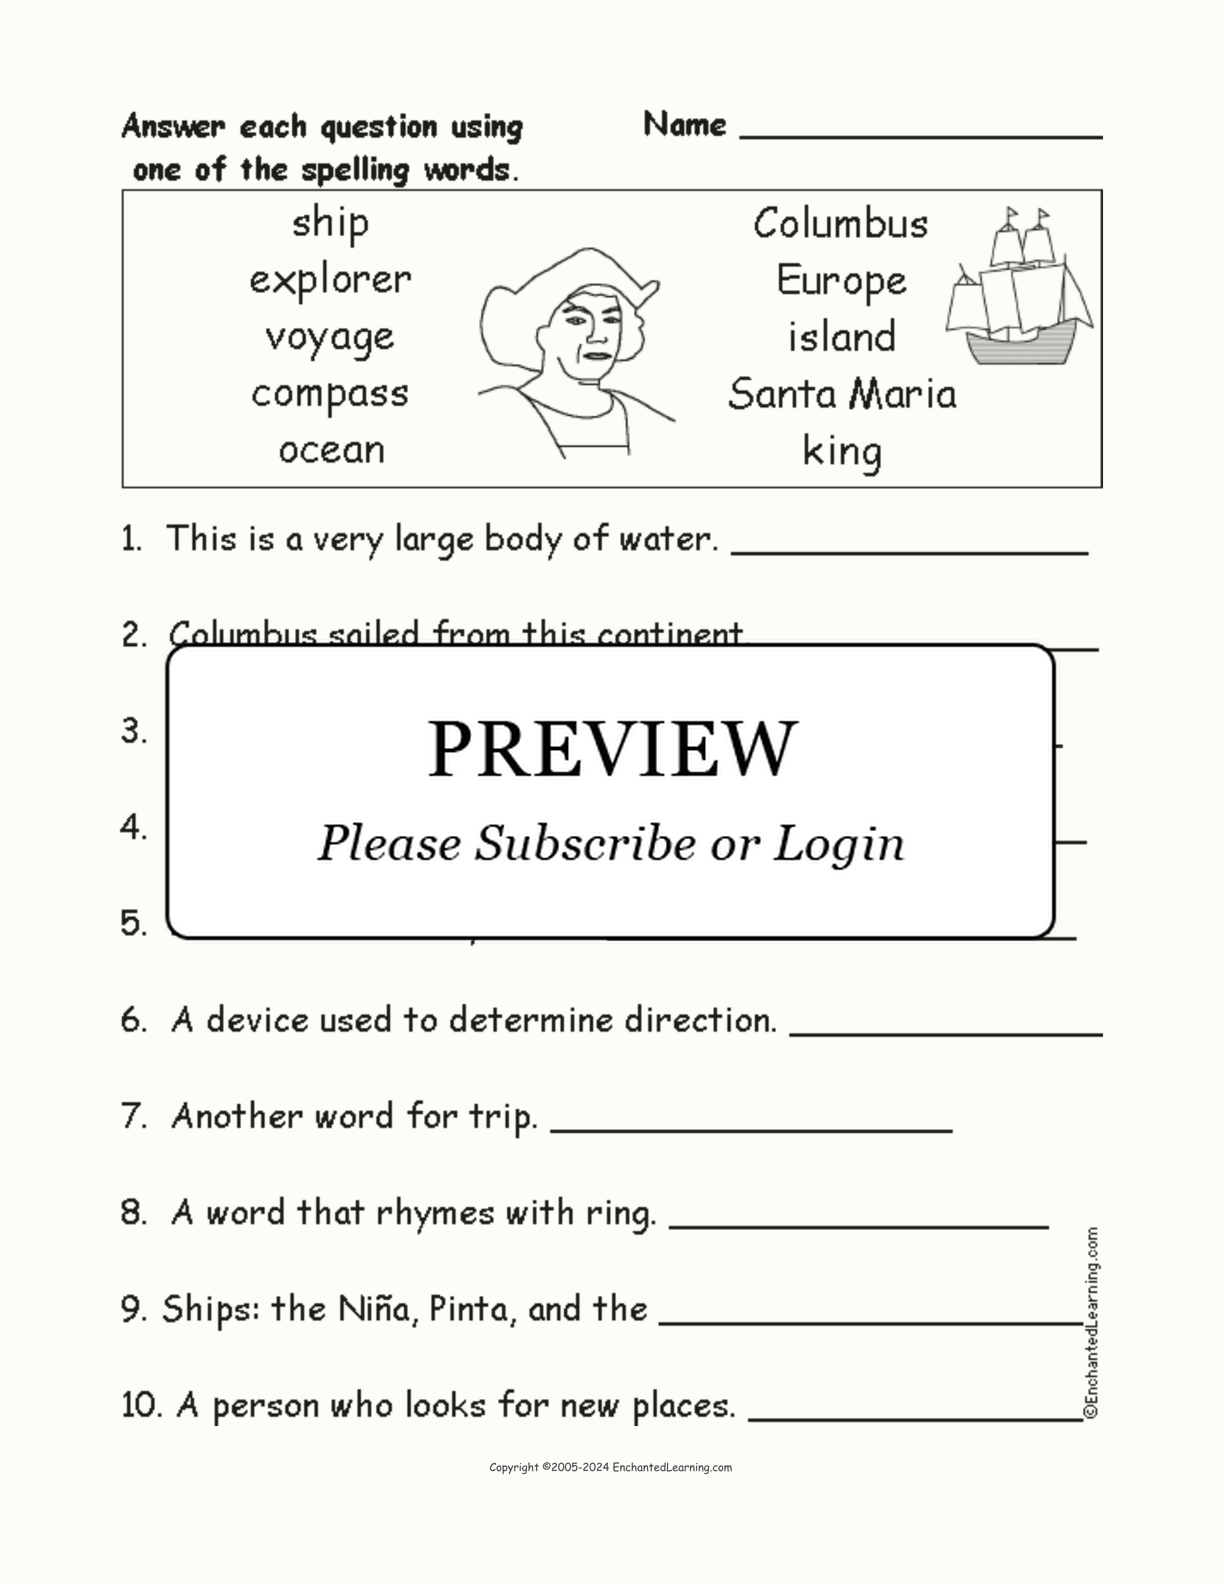 Columbus Day Spelling Word Questions interactive worksheet page 1